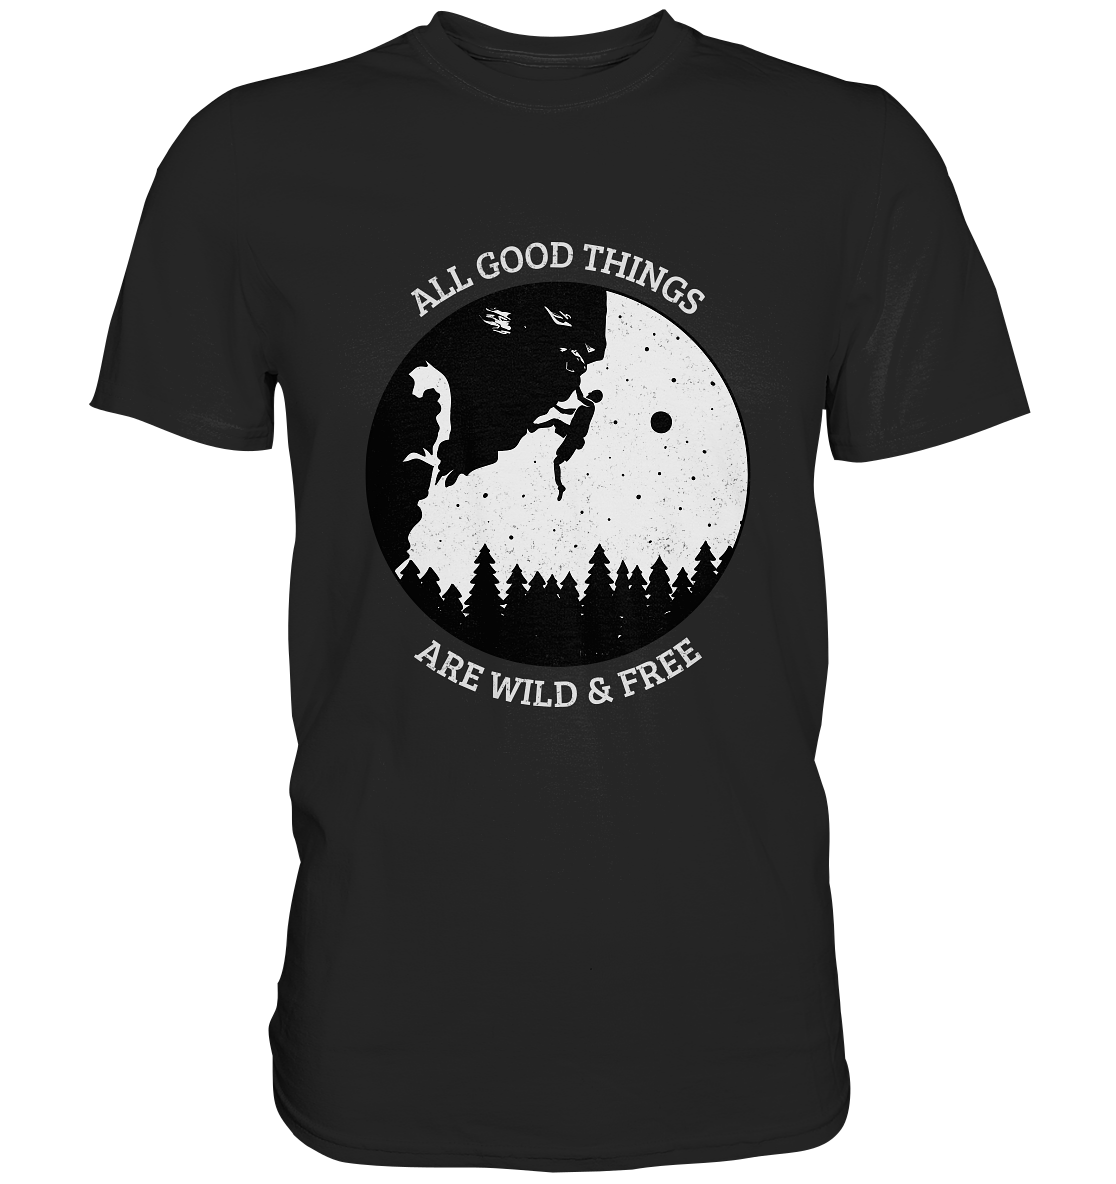 All good things are wild and free. Klettern Berge Outdoor - Premium Shirt